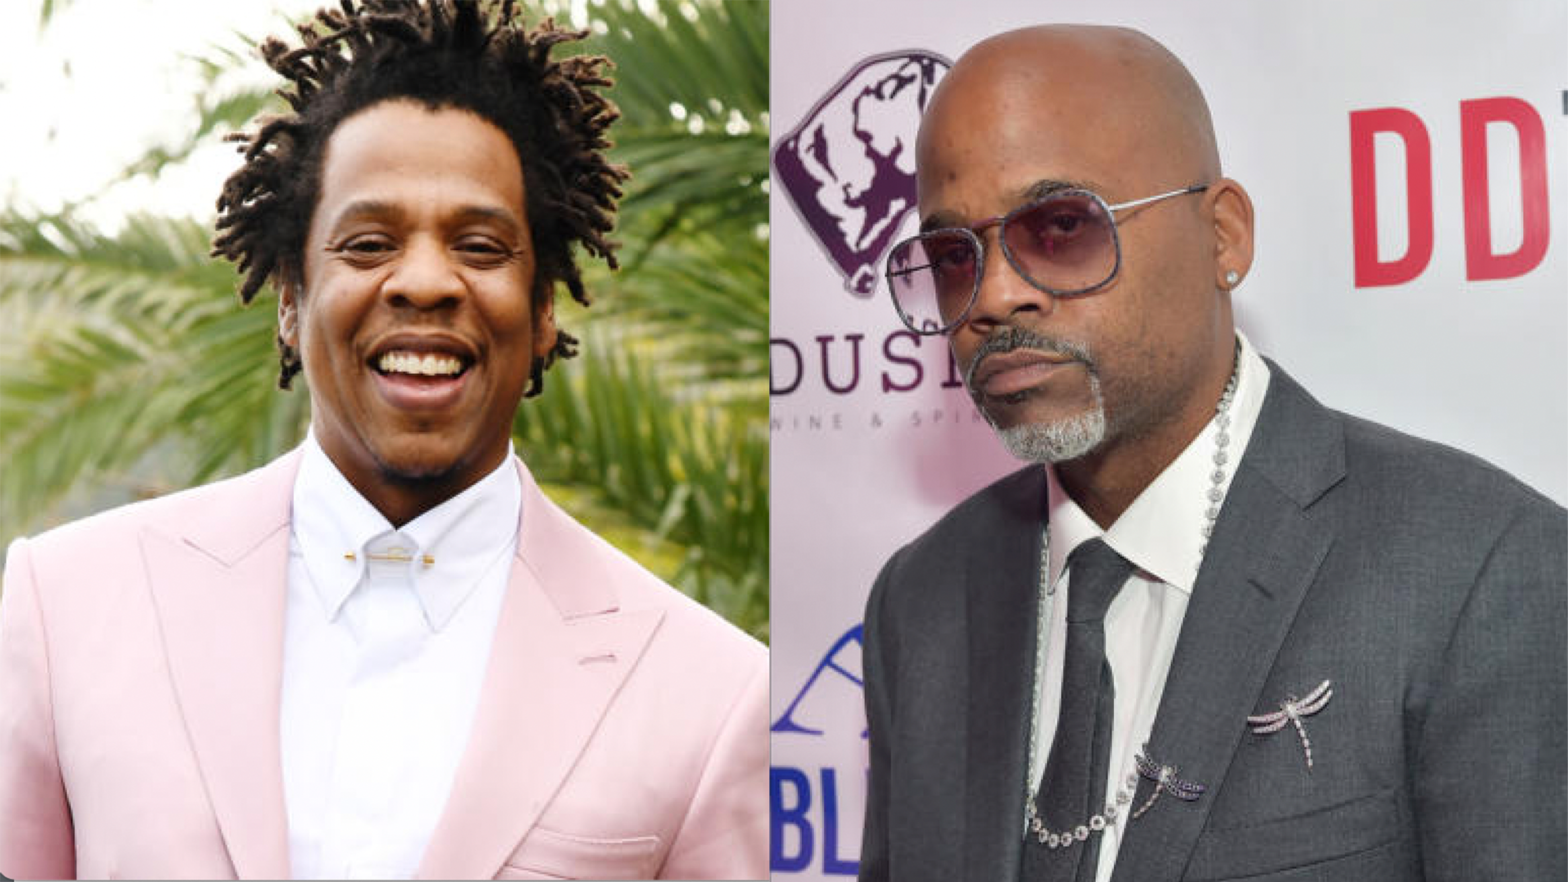 Dame Dash Claims He Was Offered A 'Disrespectful' Number From Jay-Z For His Shares In Roc-A-Fella Records